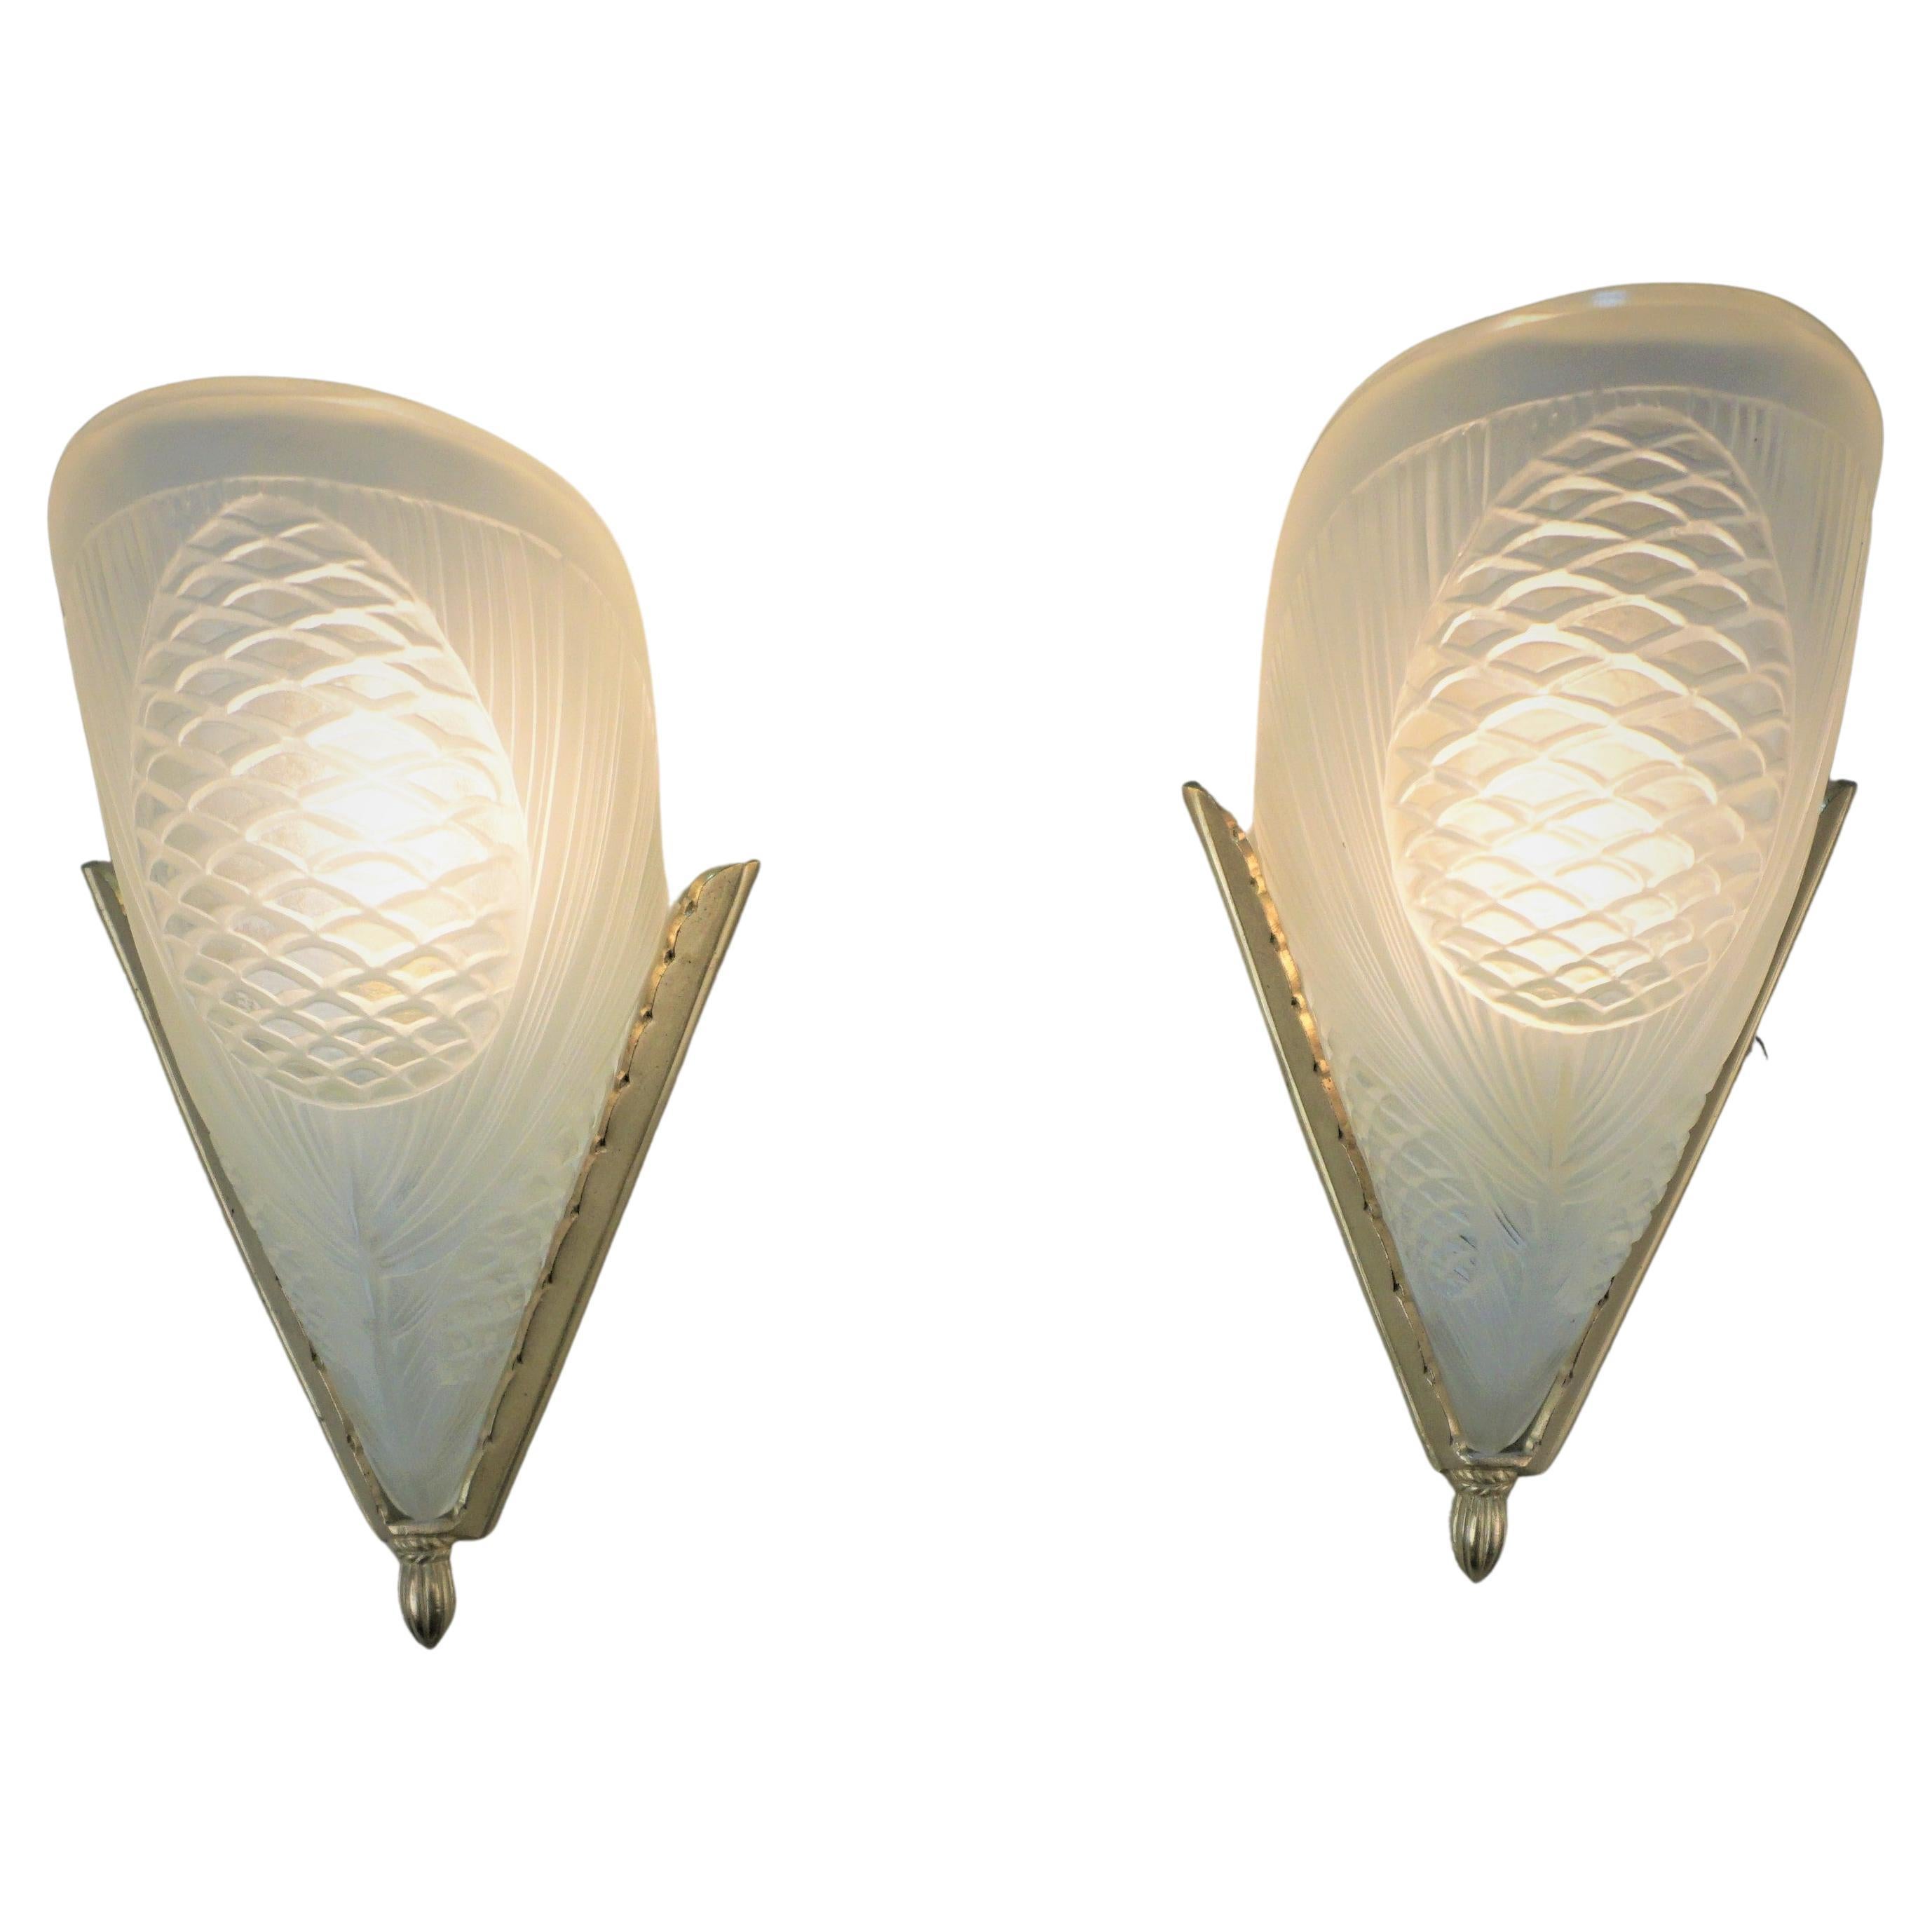 Pair of 1920's French Art Deco Wall Sconces For Sale